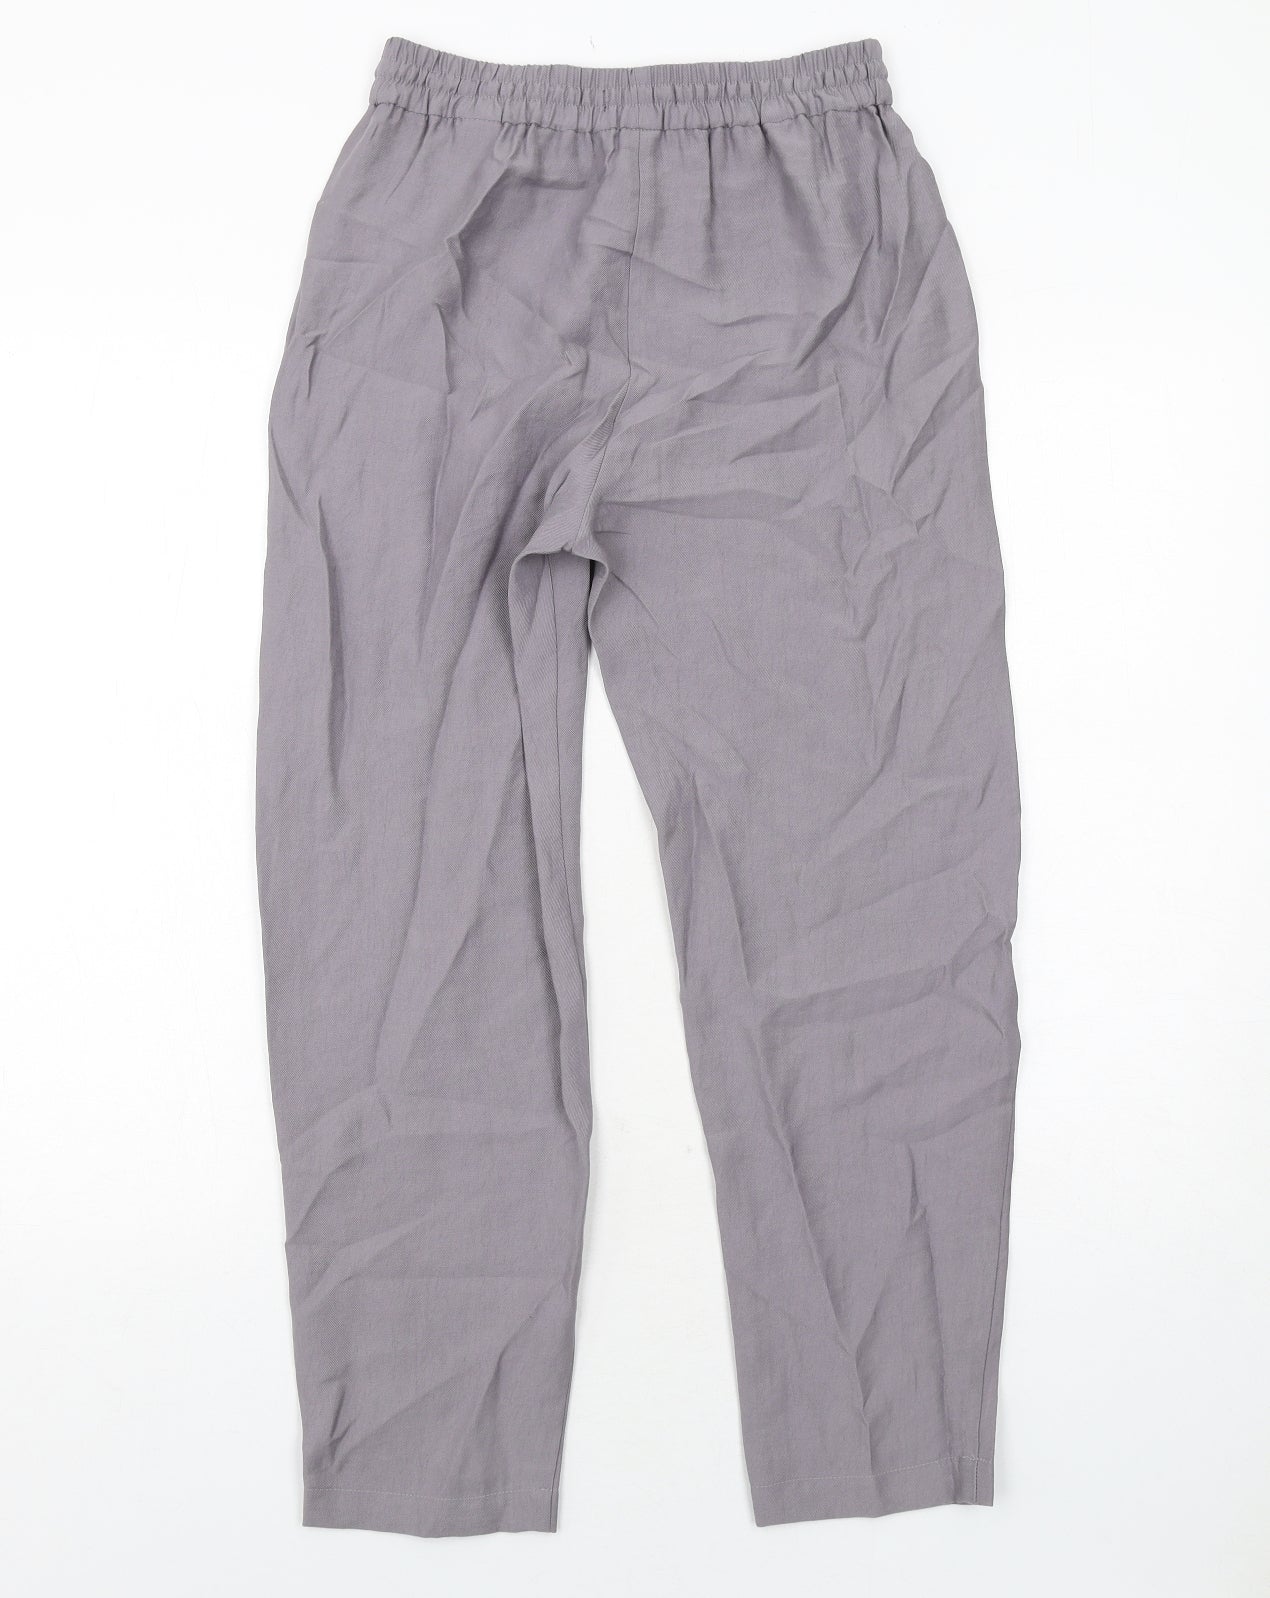 Marks and Spencer Womens Grey Lyocell Trousers Size 6 Regular Drawstring